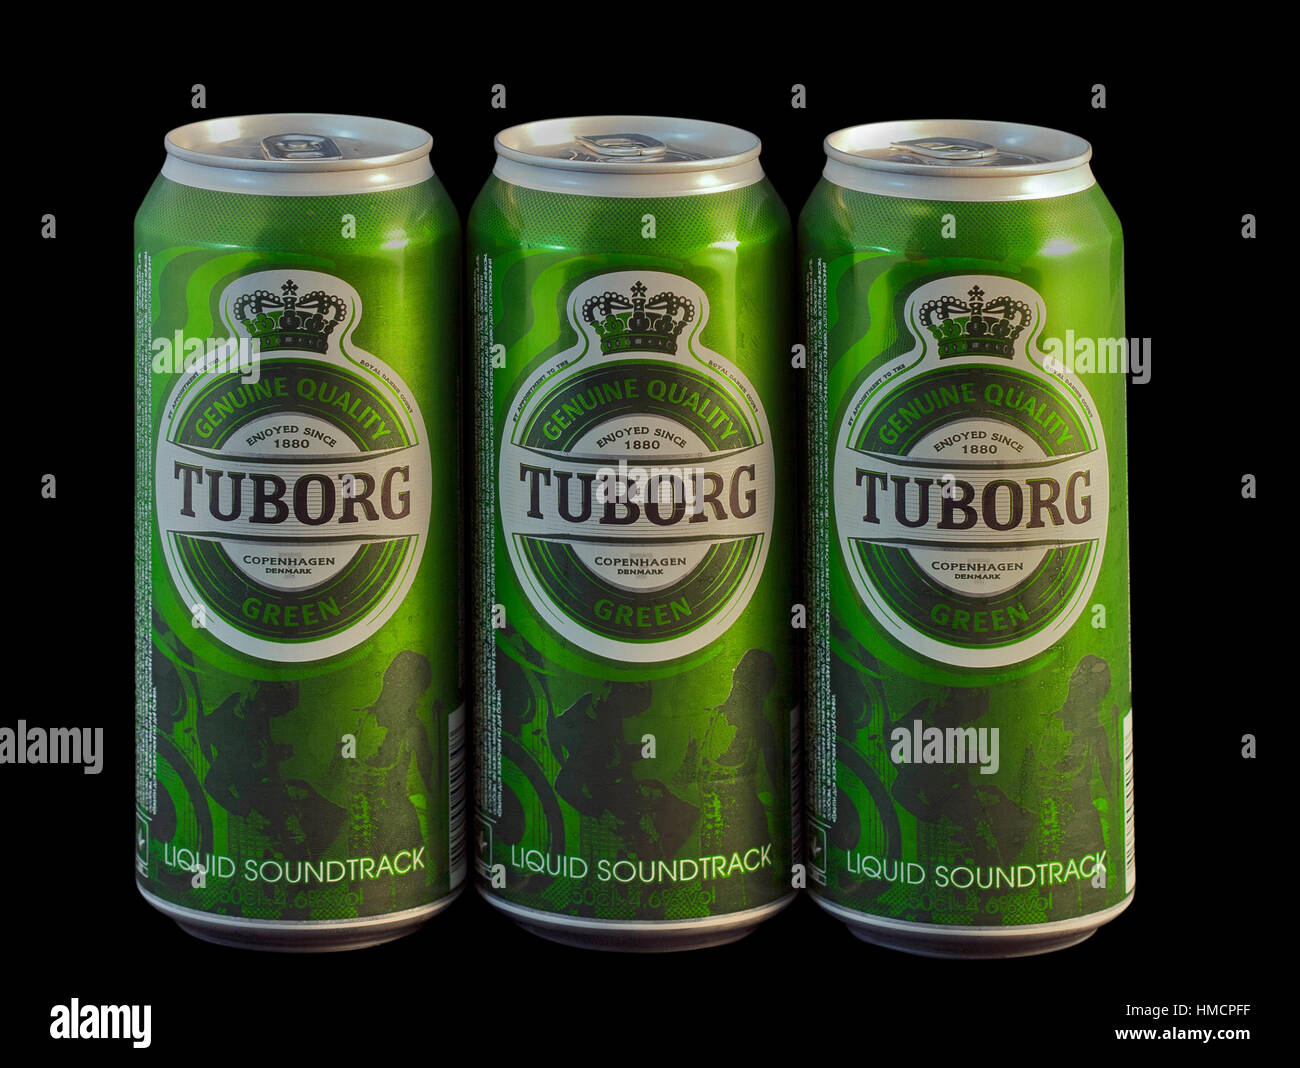 KIEV, UKRAINE - APRIL 09, 2011: Three wet Tuborg Green beer cans against black. Tuborg is a Danish brewing company founded in 1873 by Carl Frederik Ti Stock Photo